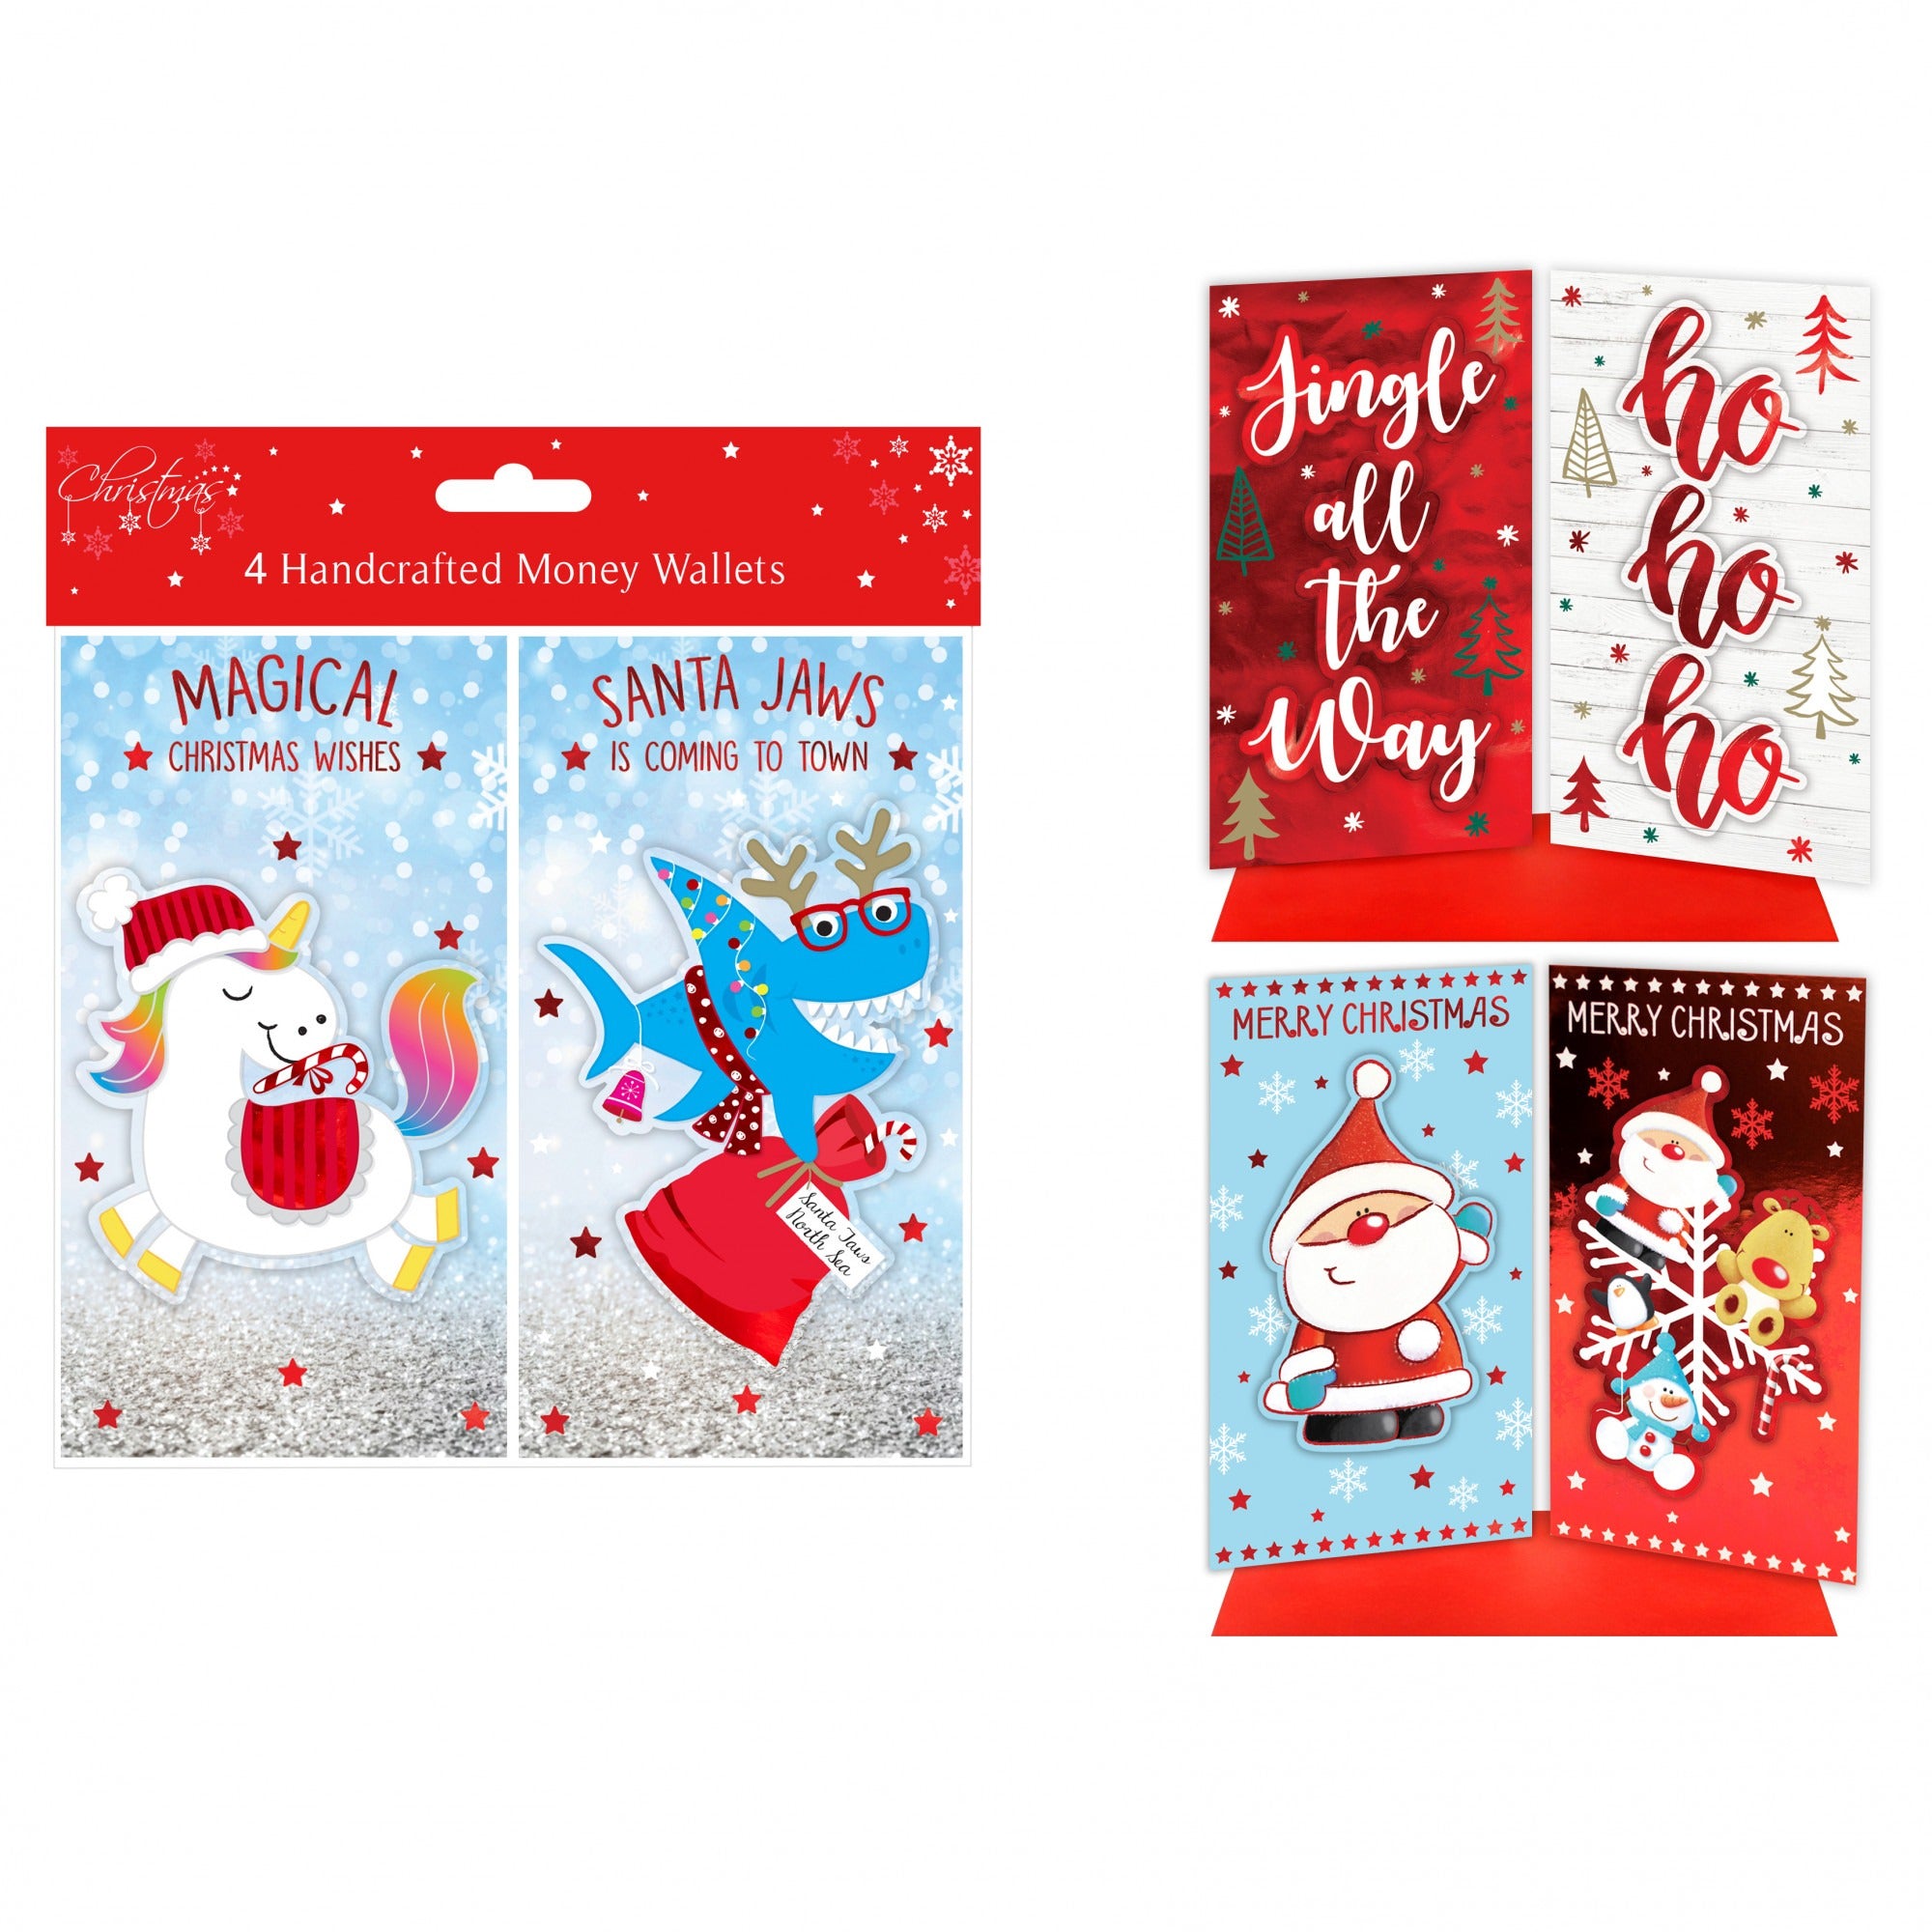 View 4 Christmas Money Wallets Assorted Designs information